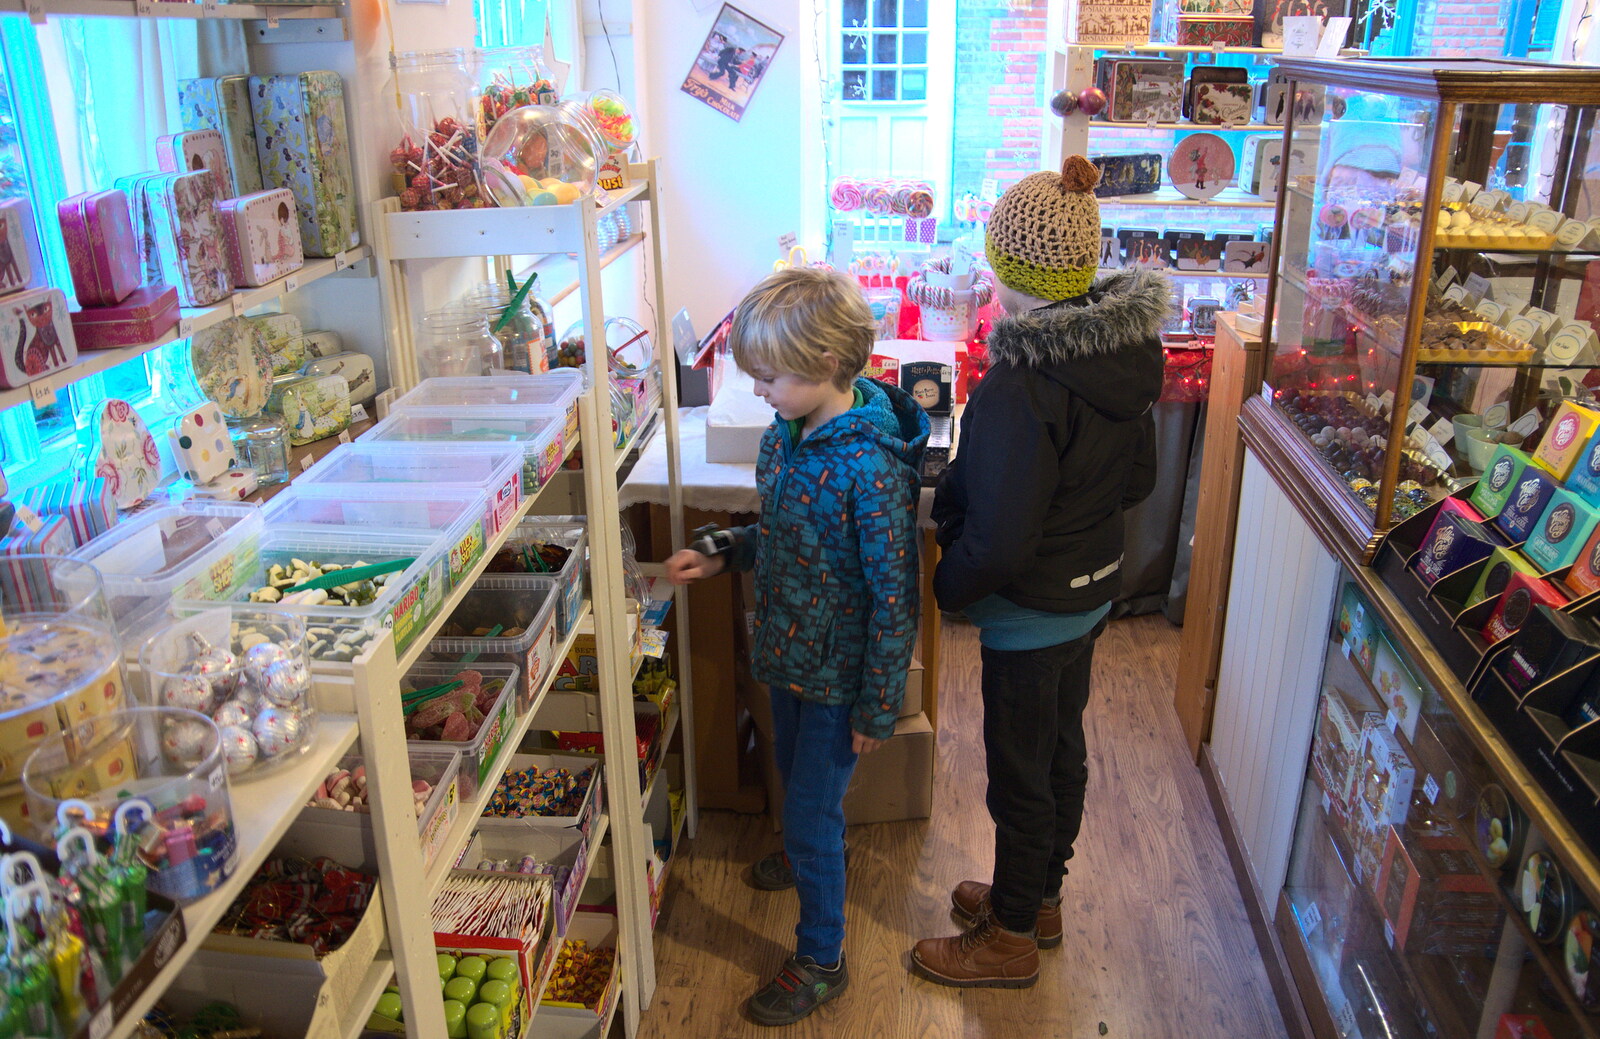 The boys roam around Claire's Sugarcraft from The St. Nicholas Street Fayre, Diss, Norfolk - 9th December 2018